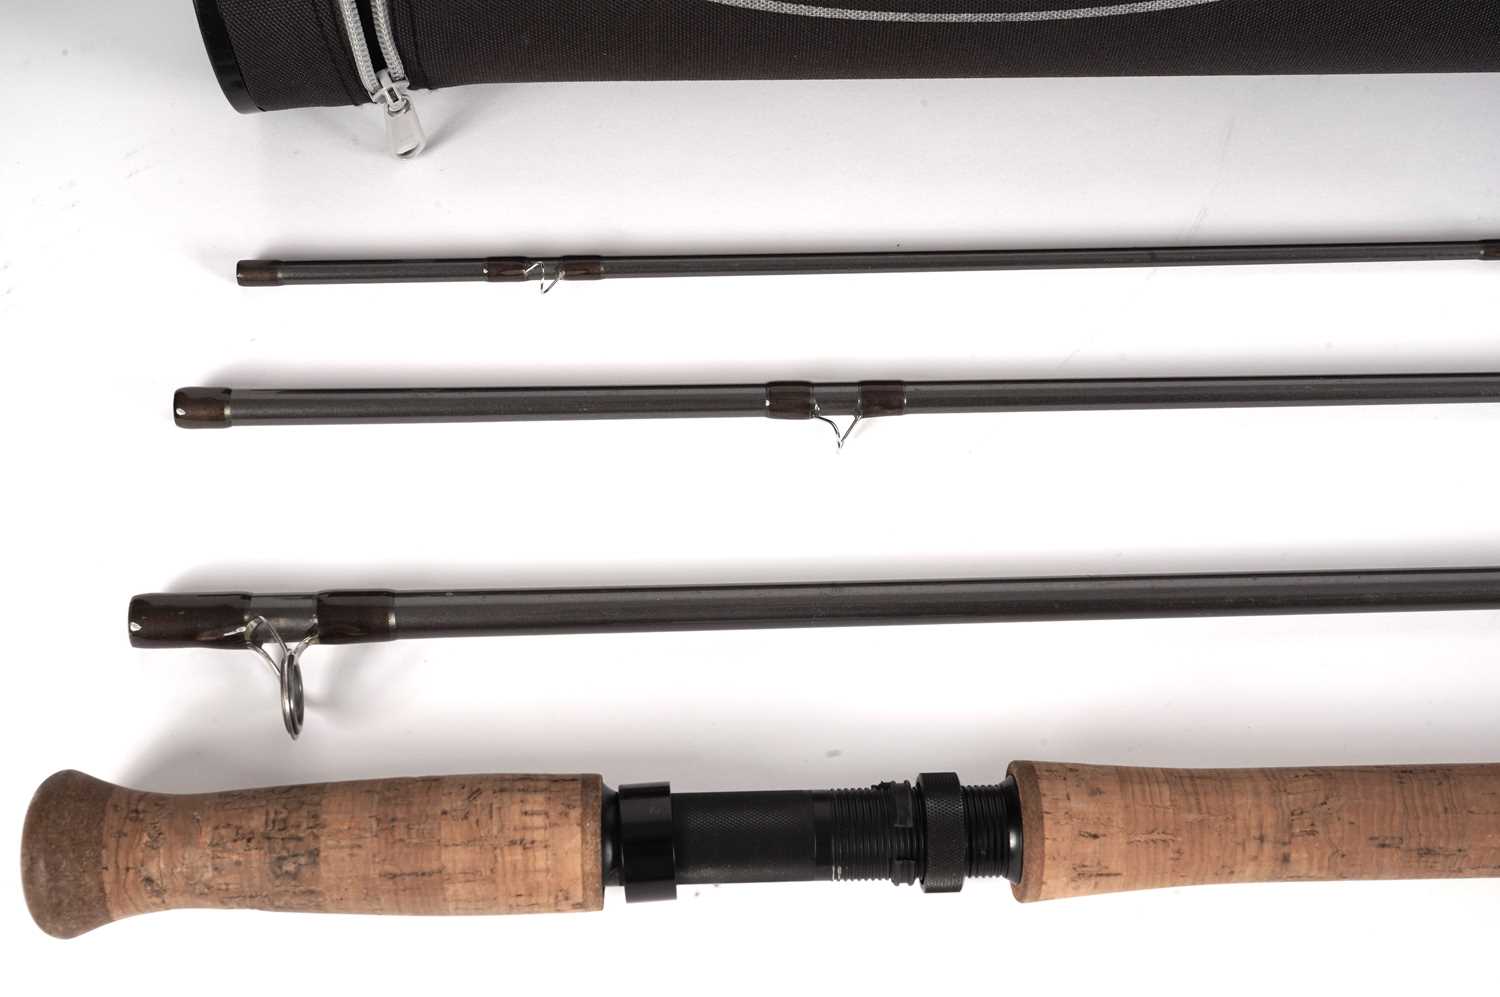 A Vision Atom DH 8-9’ line fishing rod - Image 3 of 4